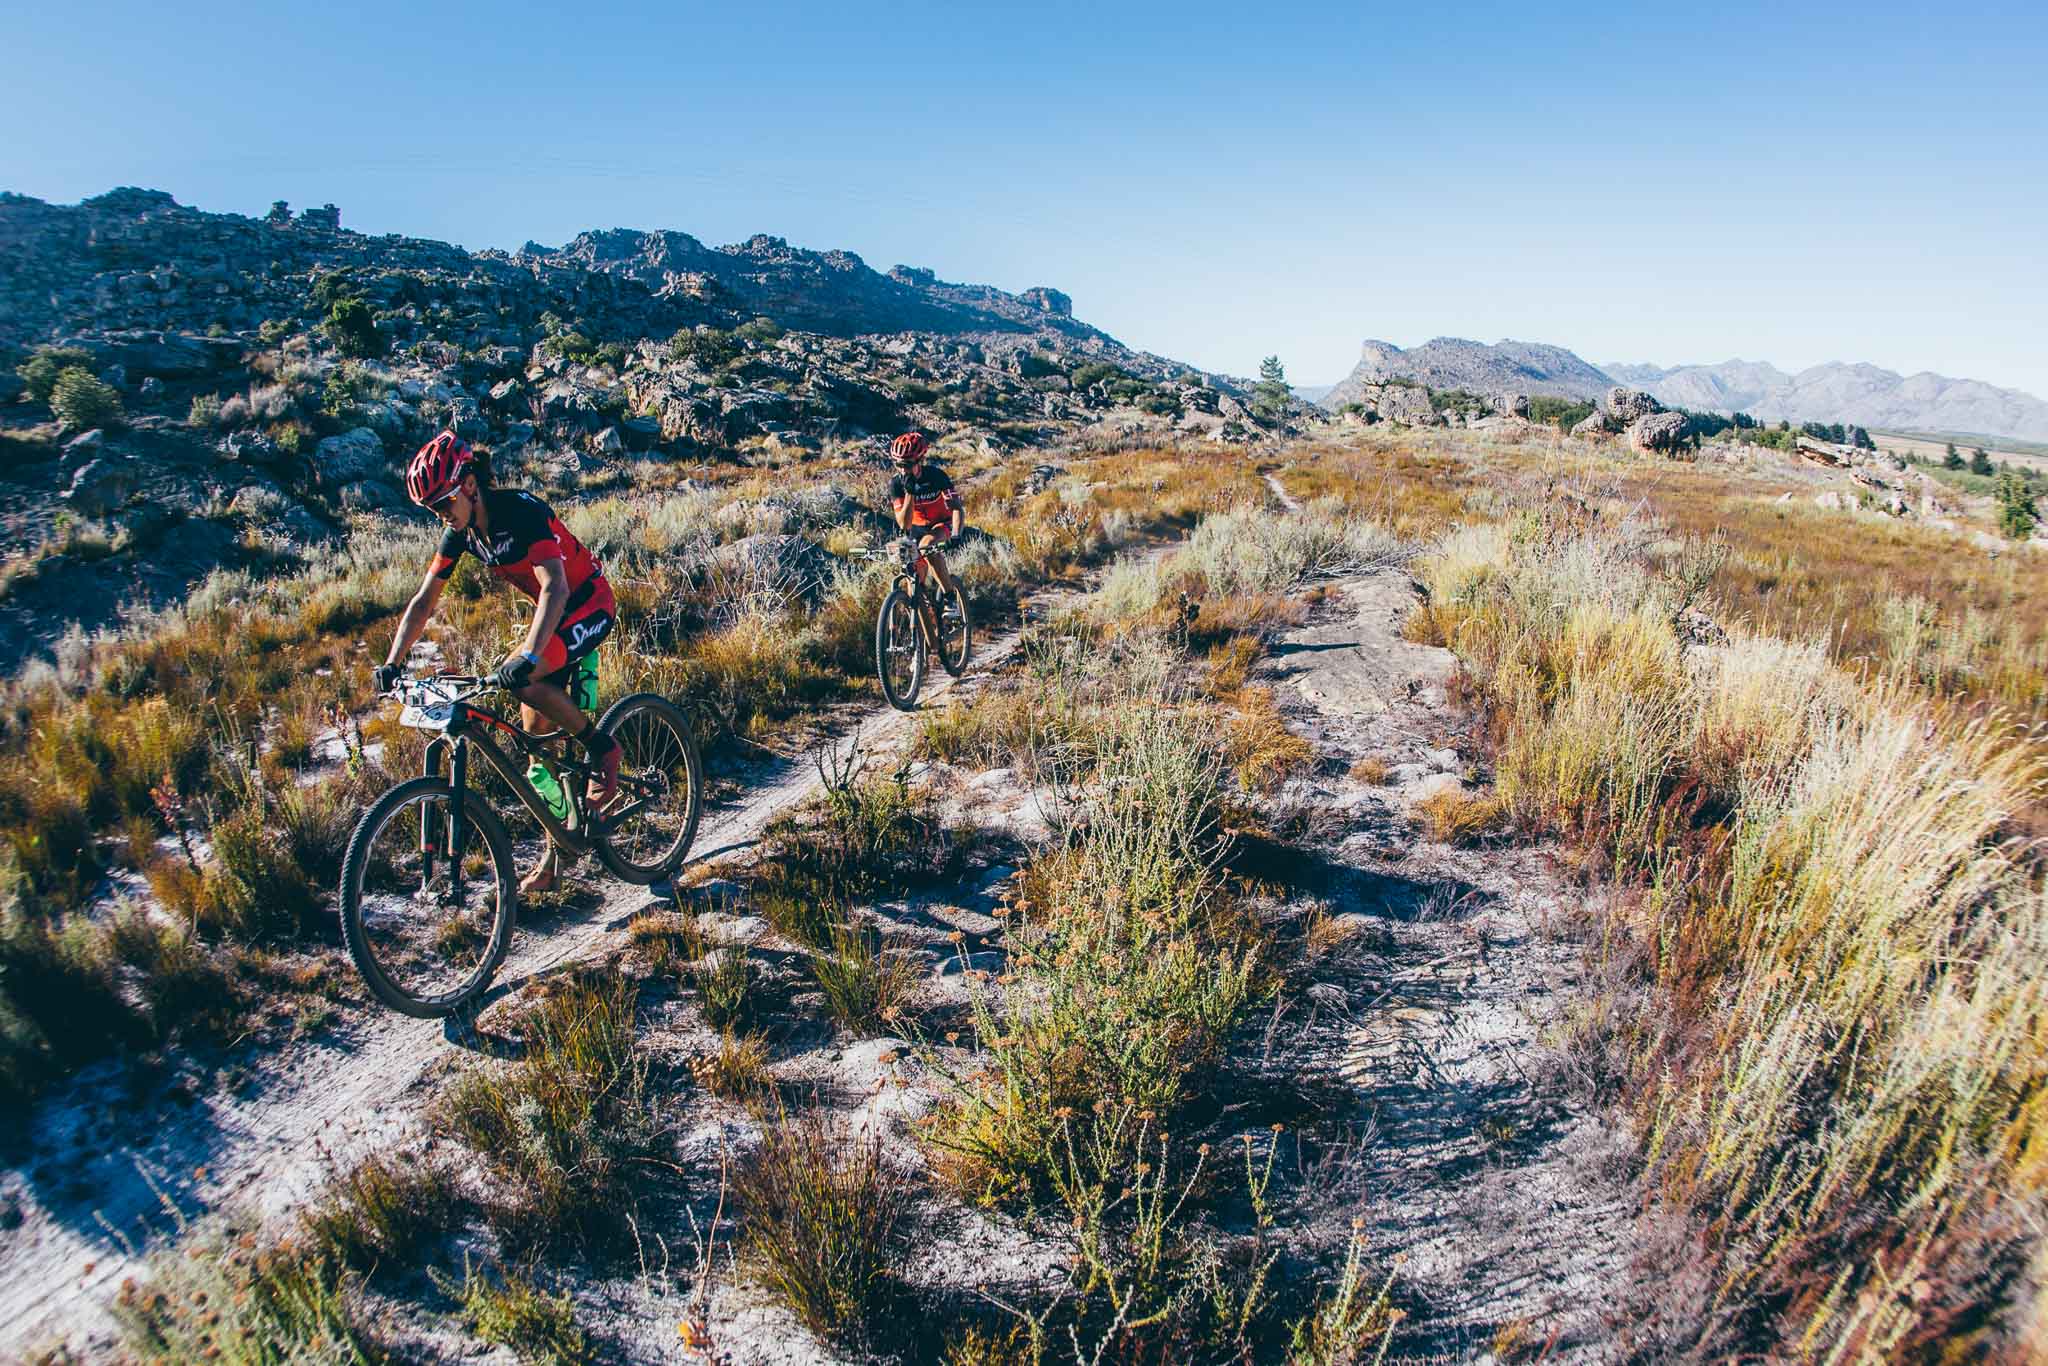 Team Spur Specialized's Annika Langvad and Arian Kleinhans during stage 2 of the 2016 Absa Cape Epic Mountain Bike stage race from Saronsberg Wine Estate in Tulbagh, South Africa on the 15th March 2016 Photo by Ewald Sadie/Cape Epic/SPORTZPICS PLEASE ENSURE THE APPROPRIATE CREDIT IS GIVEN TO THE PHOTOGRAPHER AND SPORTZPICS ALONG WITH THE ABSA CAPE EPIC ace2016